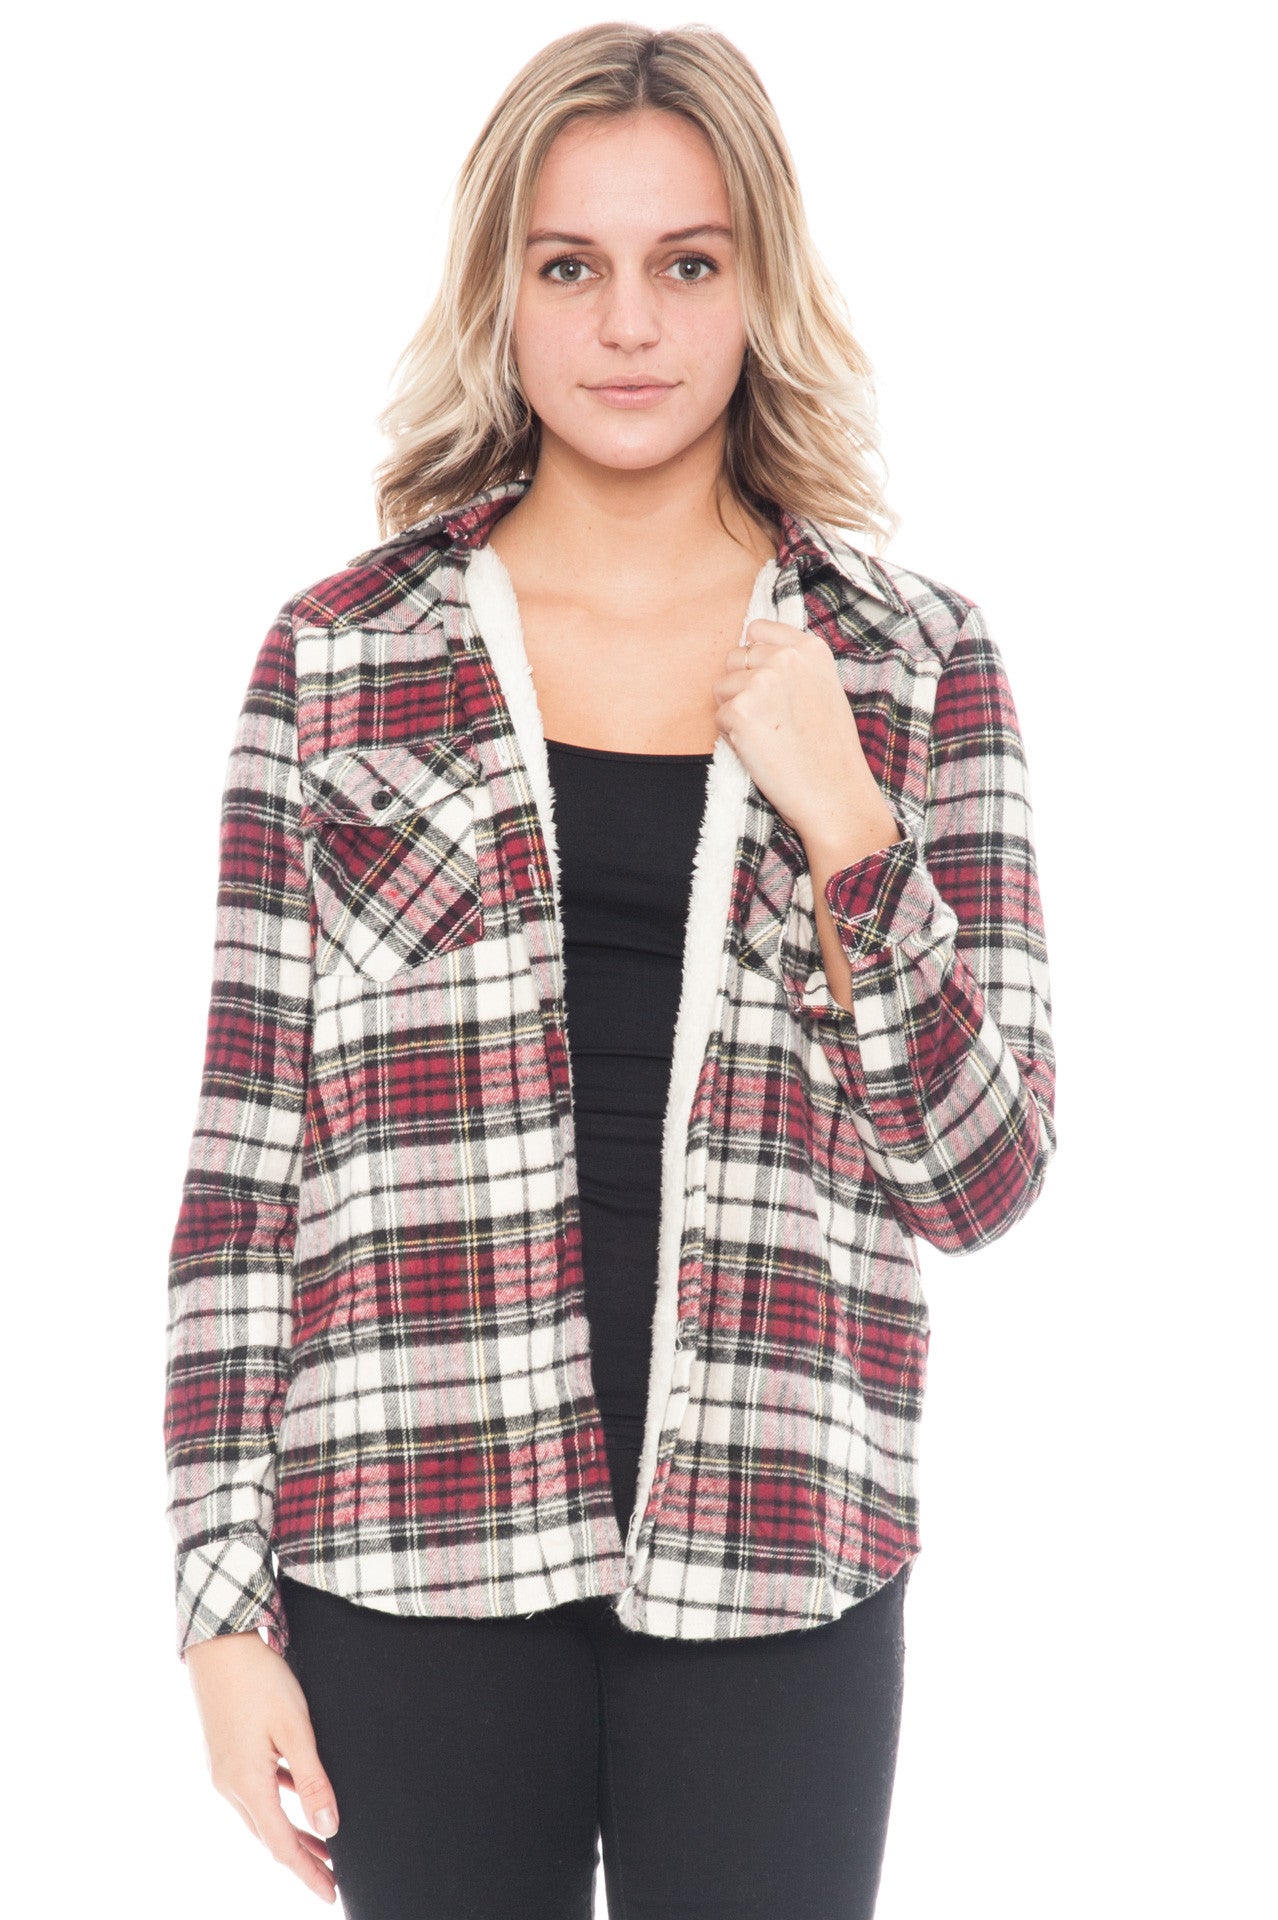 Shirt - Plaid Flannel Button Up with Sherpa Lining By Paper Crane (Final Sale)